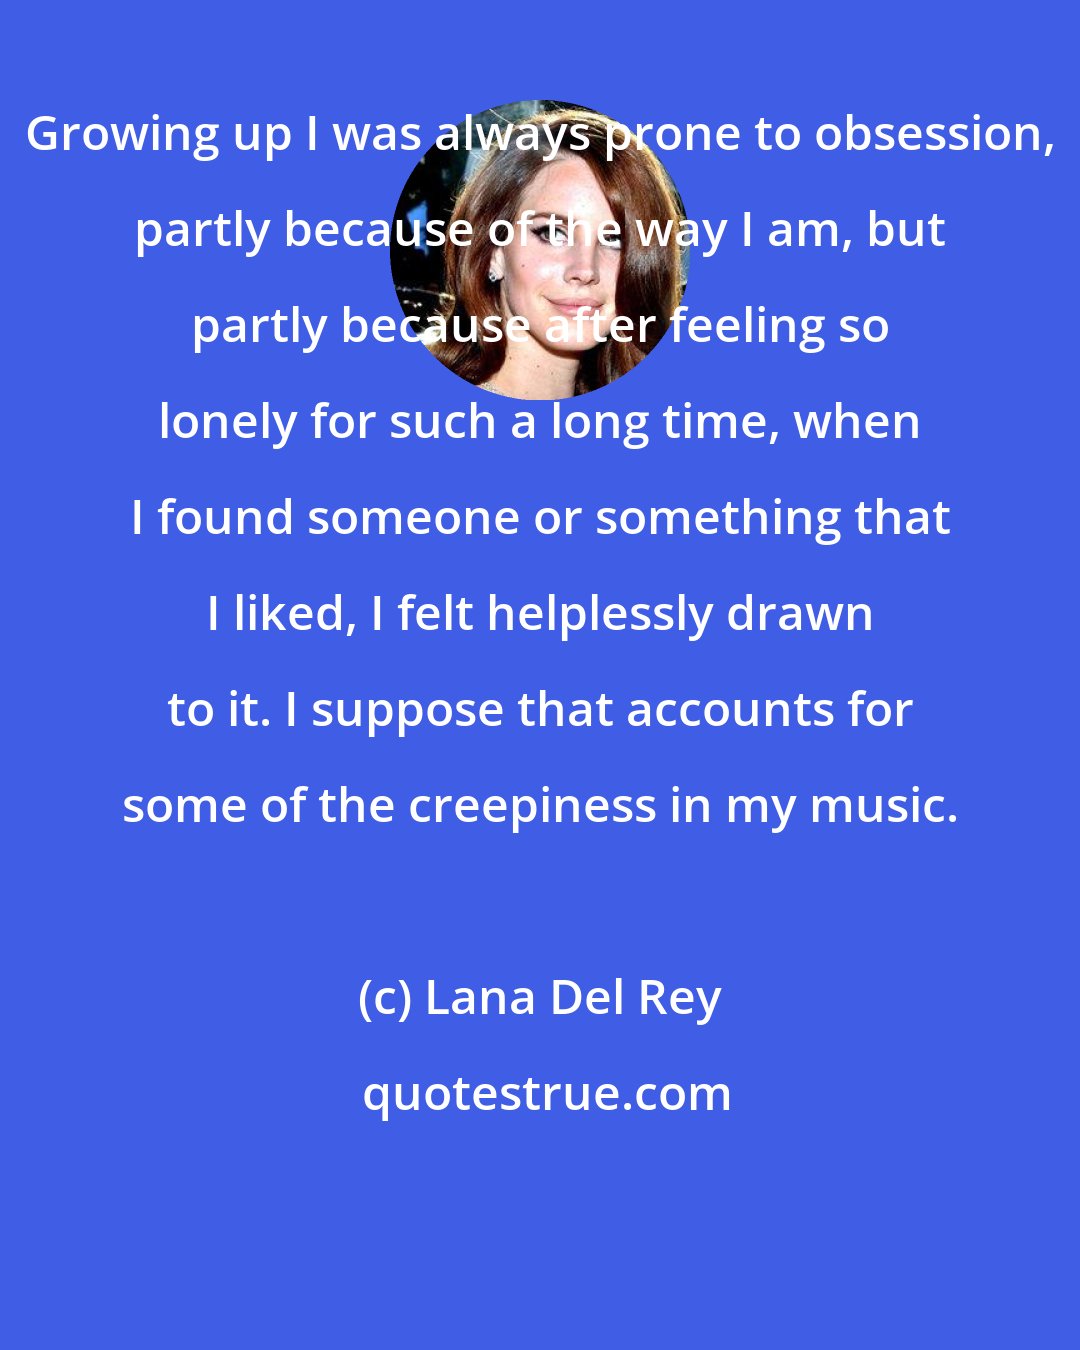 Lana Del Rey: Growing up I was always prone to obsession, partly because of the way I am, but partly because after feeling so lonely for such a long time, when I found someone or something that I liked, I felt helplessly drawn to it. I suppose that accounts for some of the creepiness in my music.